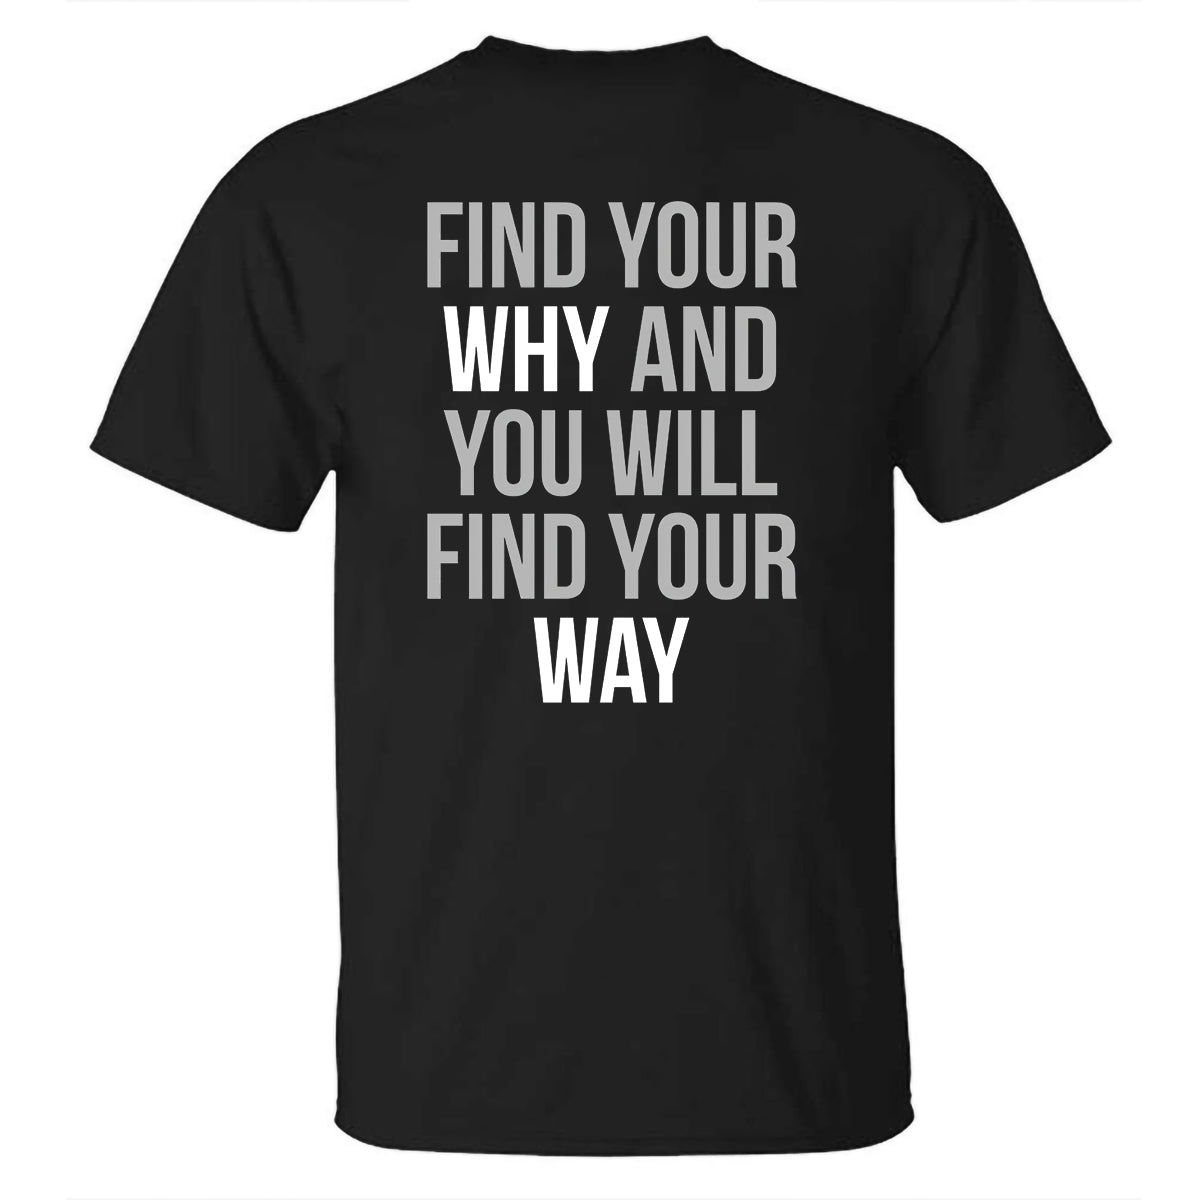 Find Your Why And You Will Find Your Way Printed T-shirt